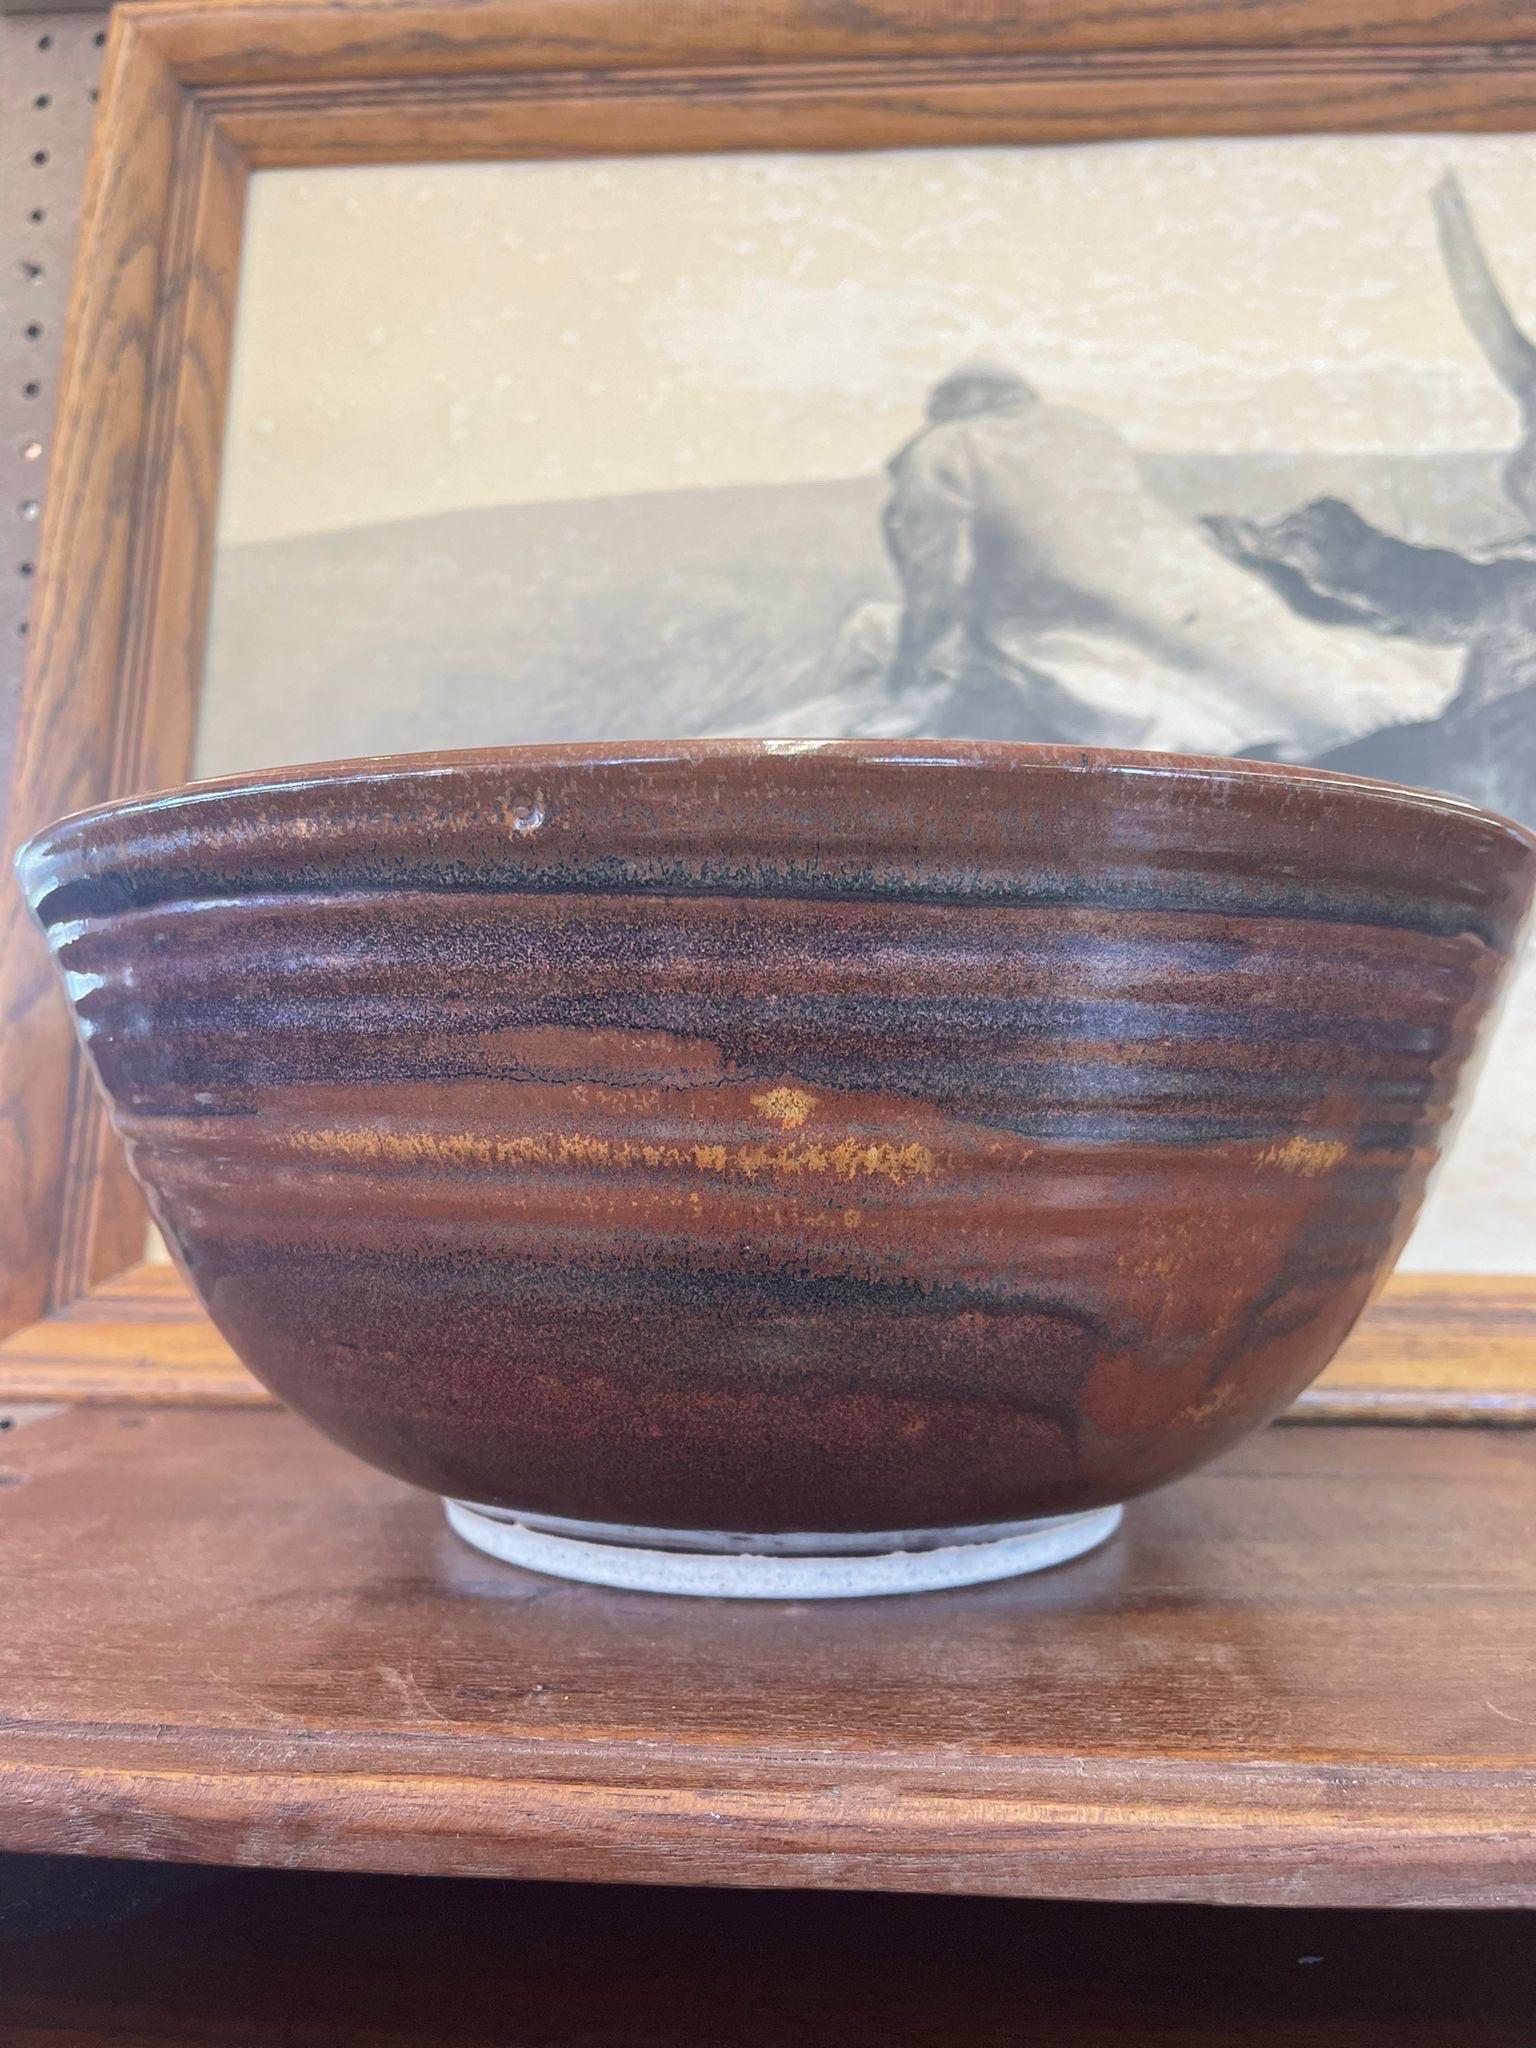 Salad Bowl or Beautiful Decor Piece.Signed M.G on the Bottom as Pictured.White Interior with Abstract Brown Detailing.

Dimensions. 13 Diameter; 6 H